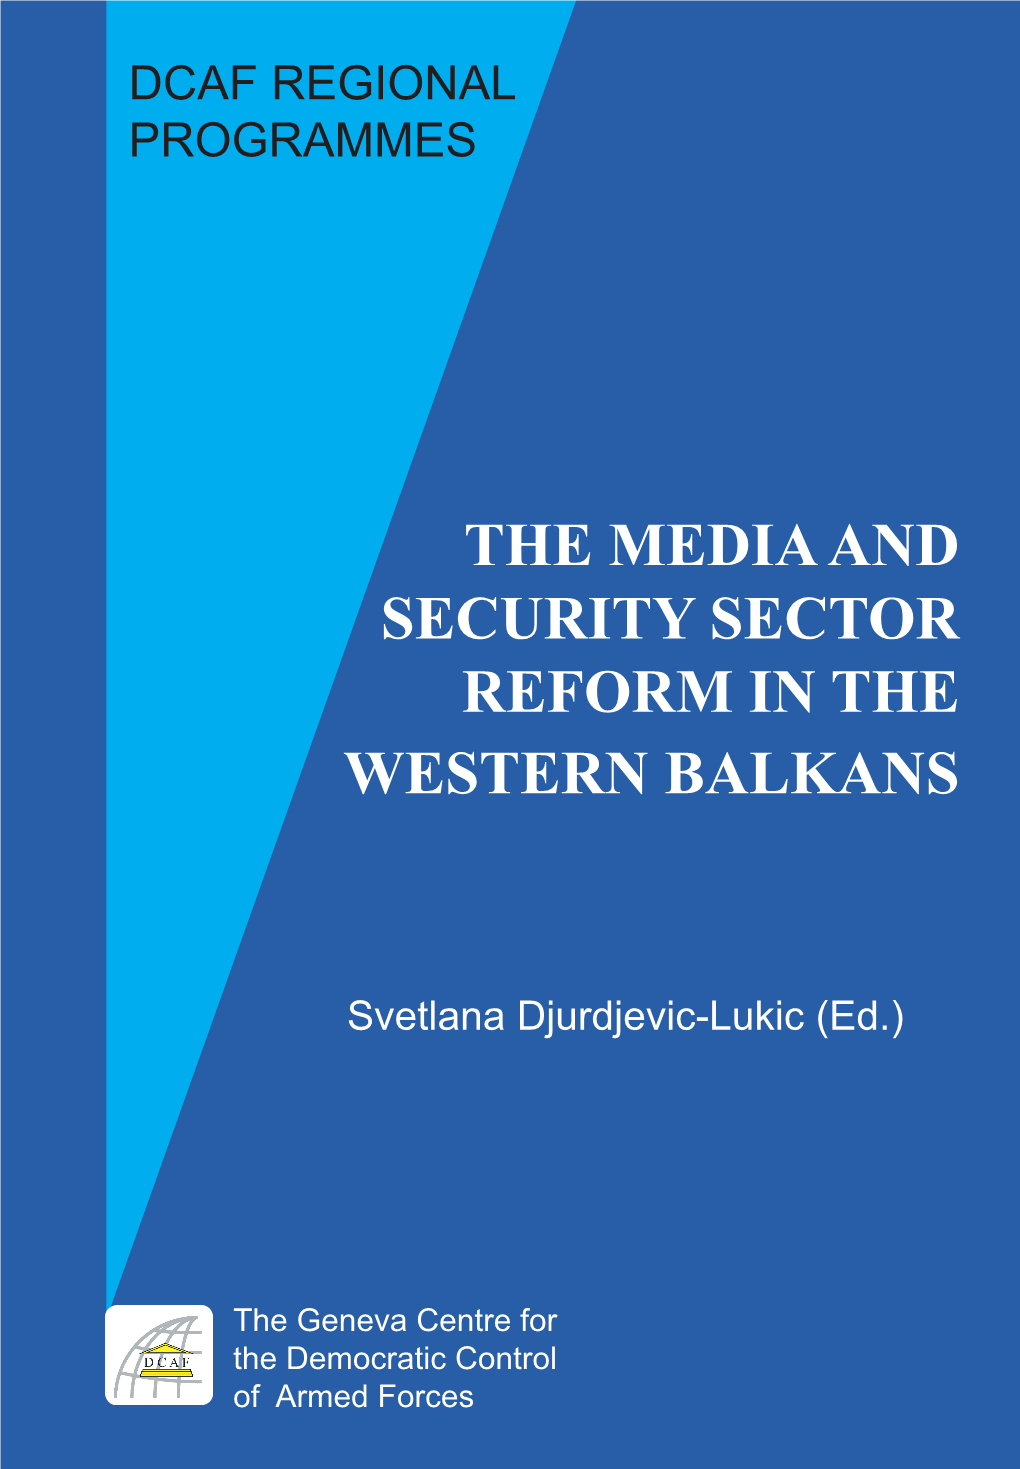 The Media and Security Sector Reform in the Western Balkans